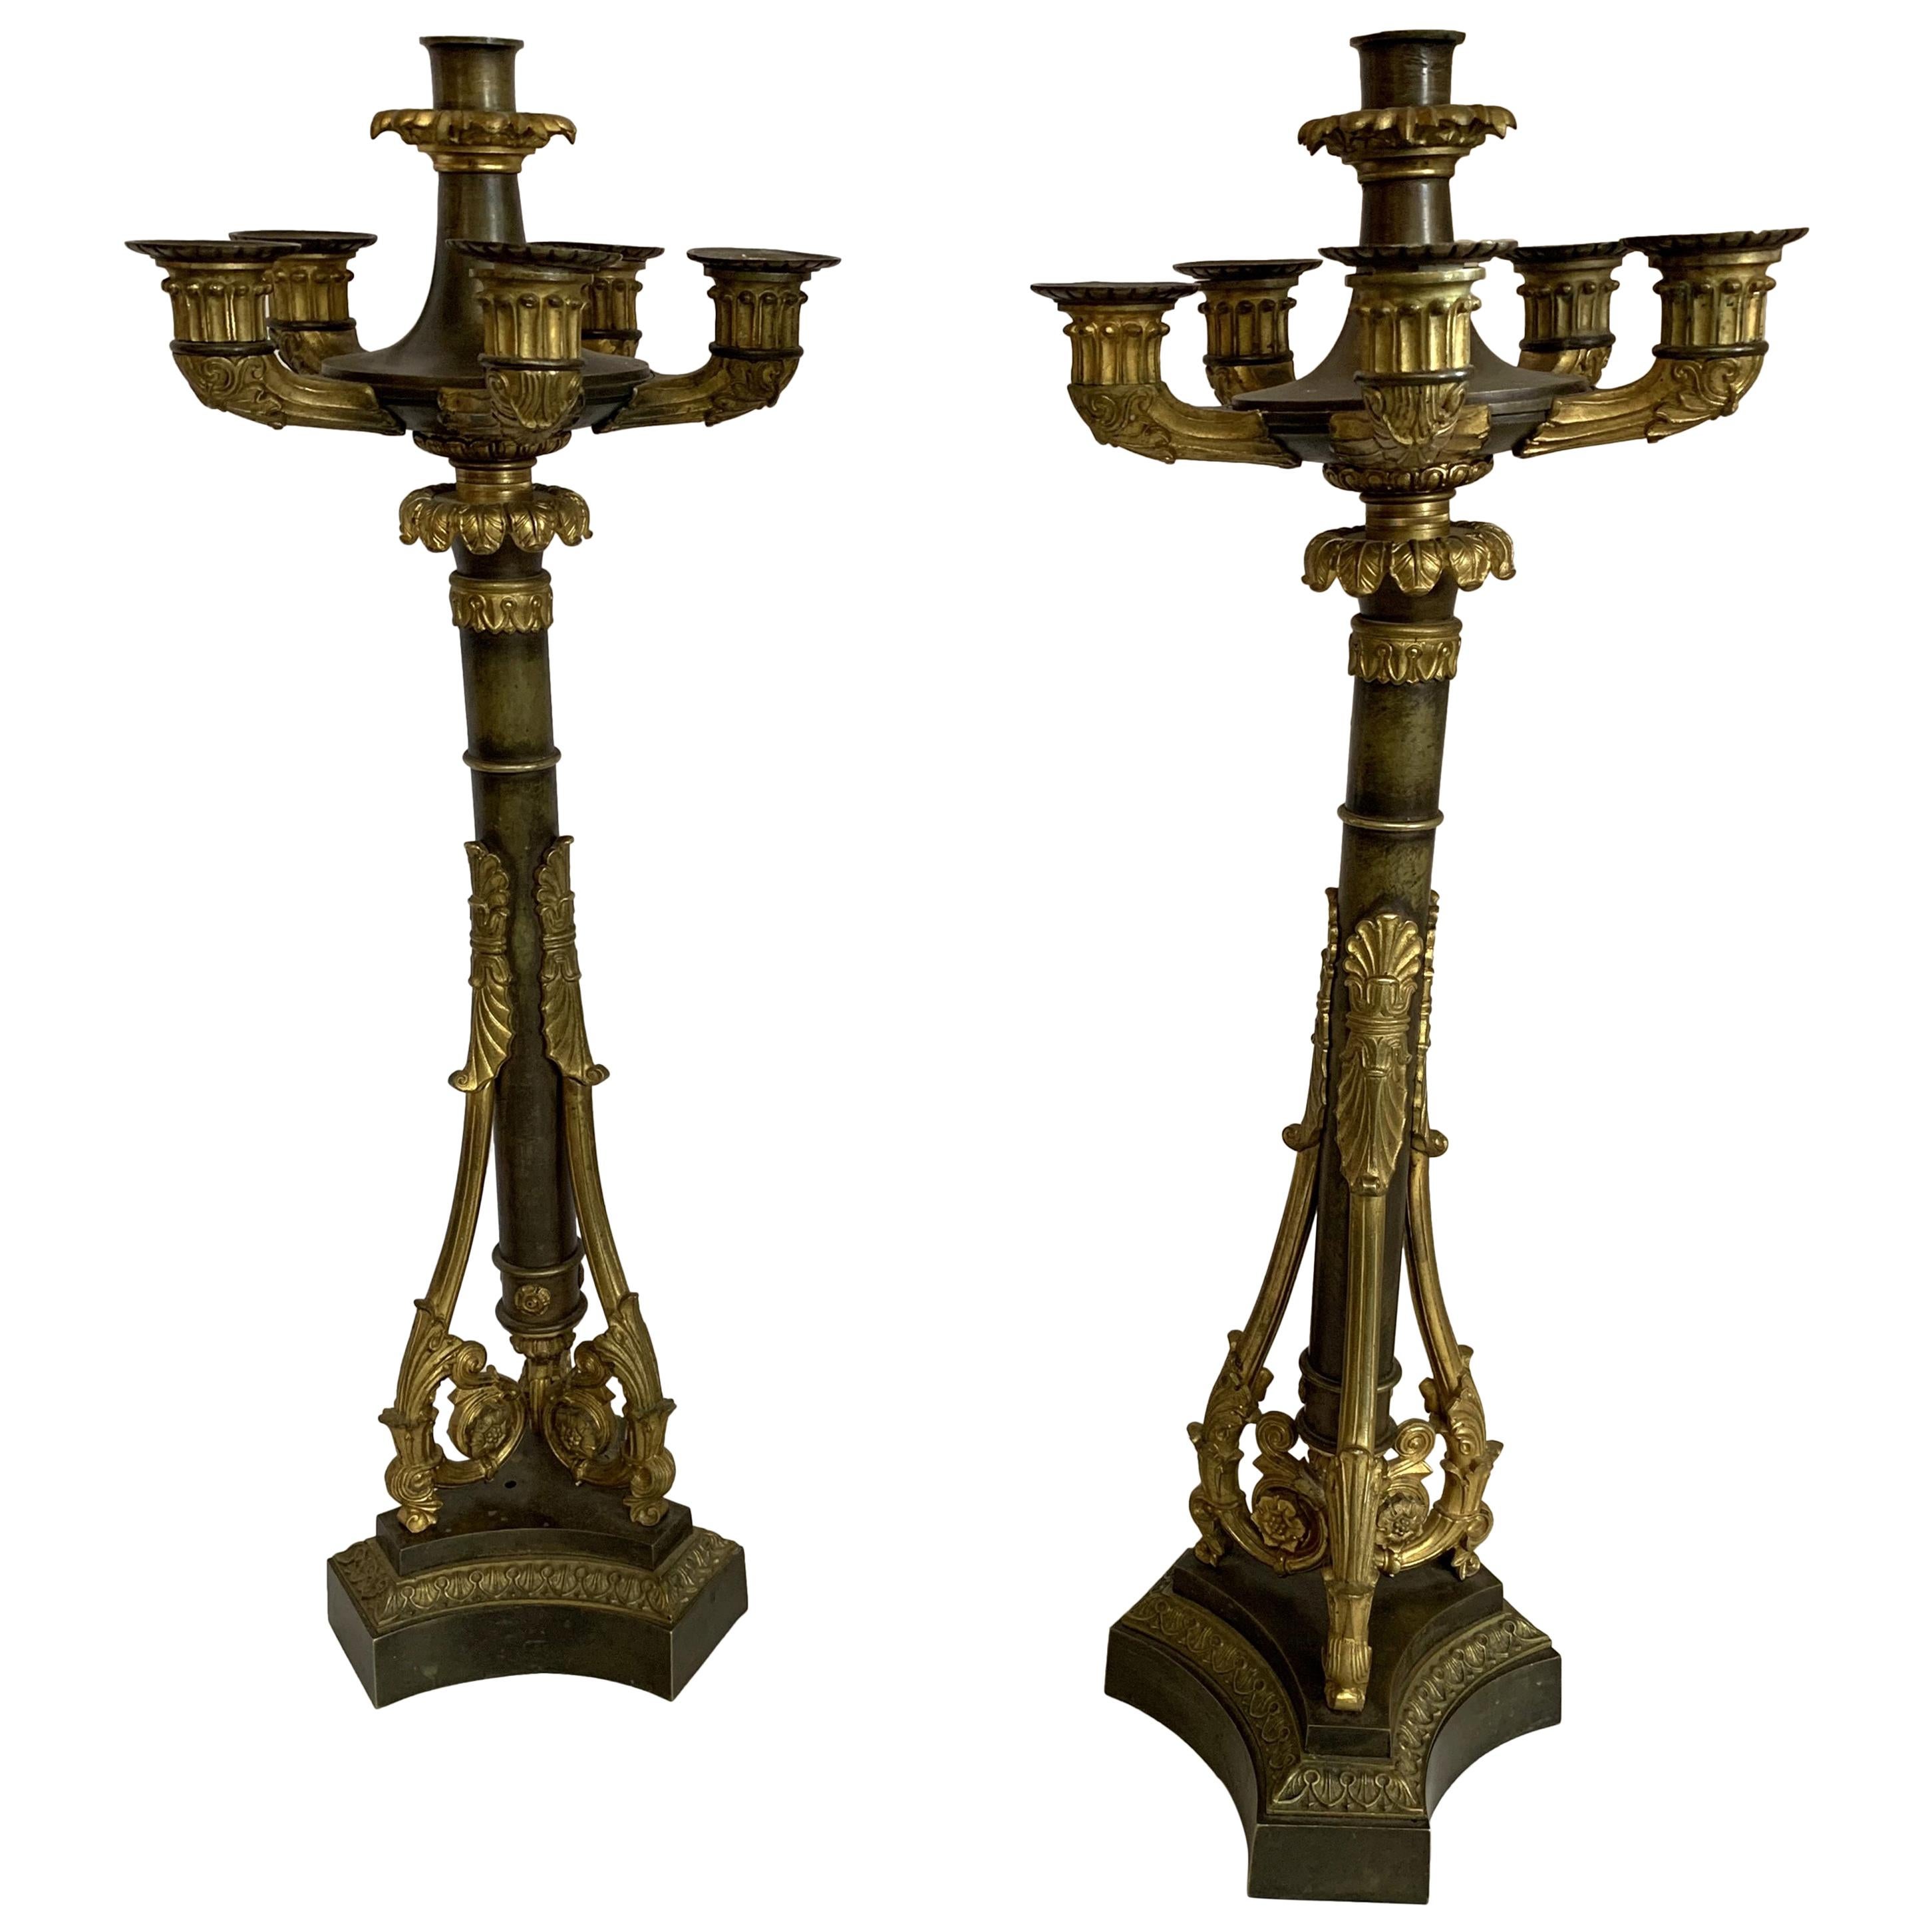 Wonderful French Empire Neoclassical Bronze Two-Tone Pair Fine Candelabras For Sale